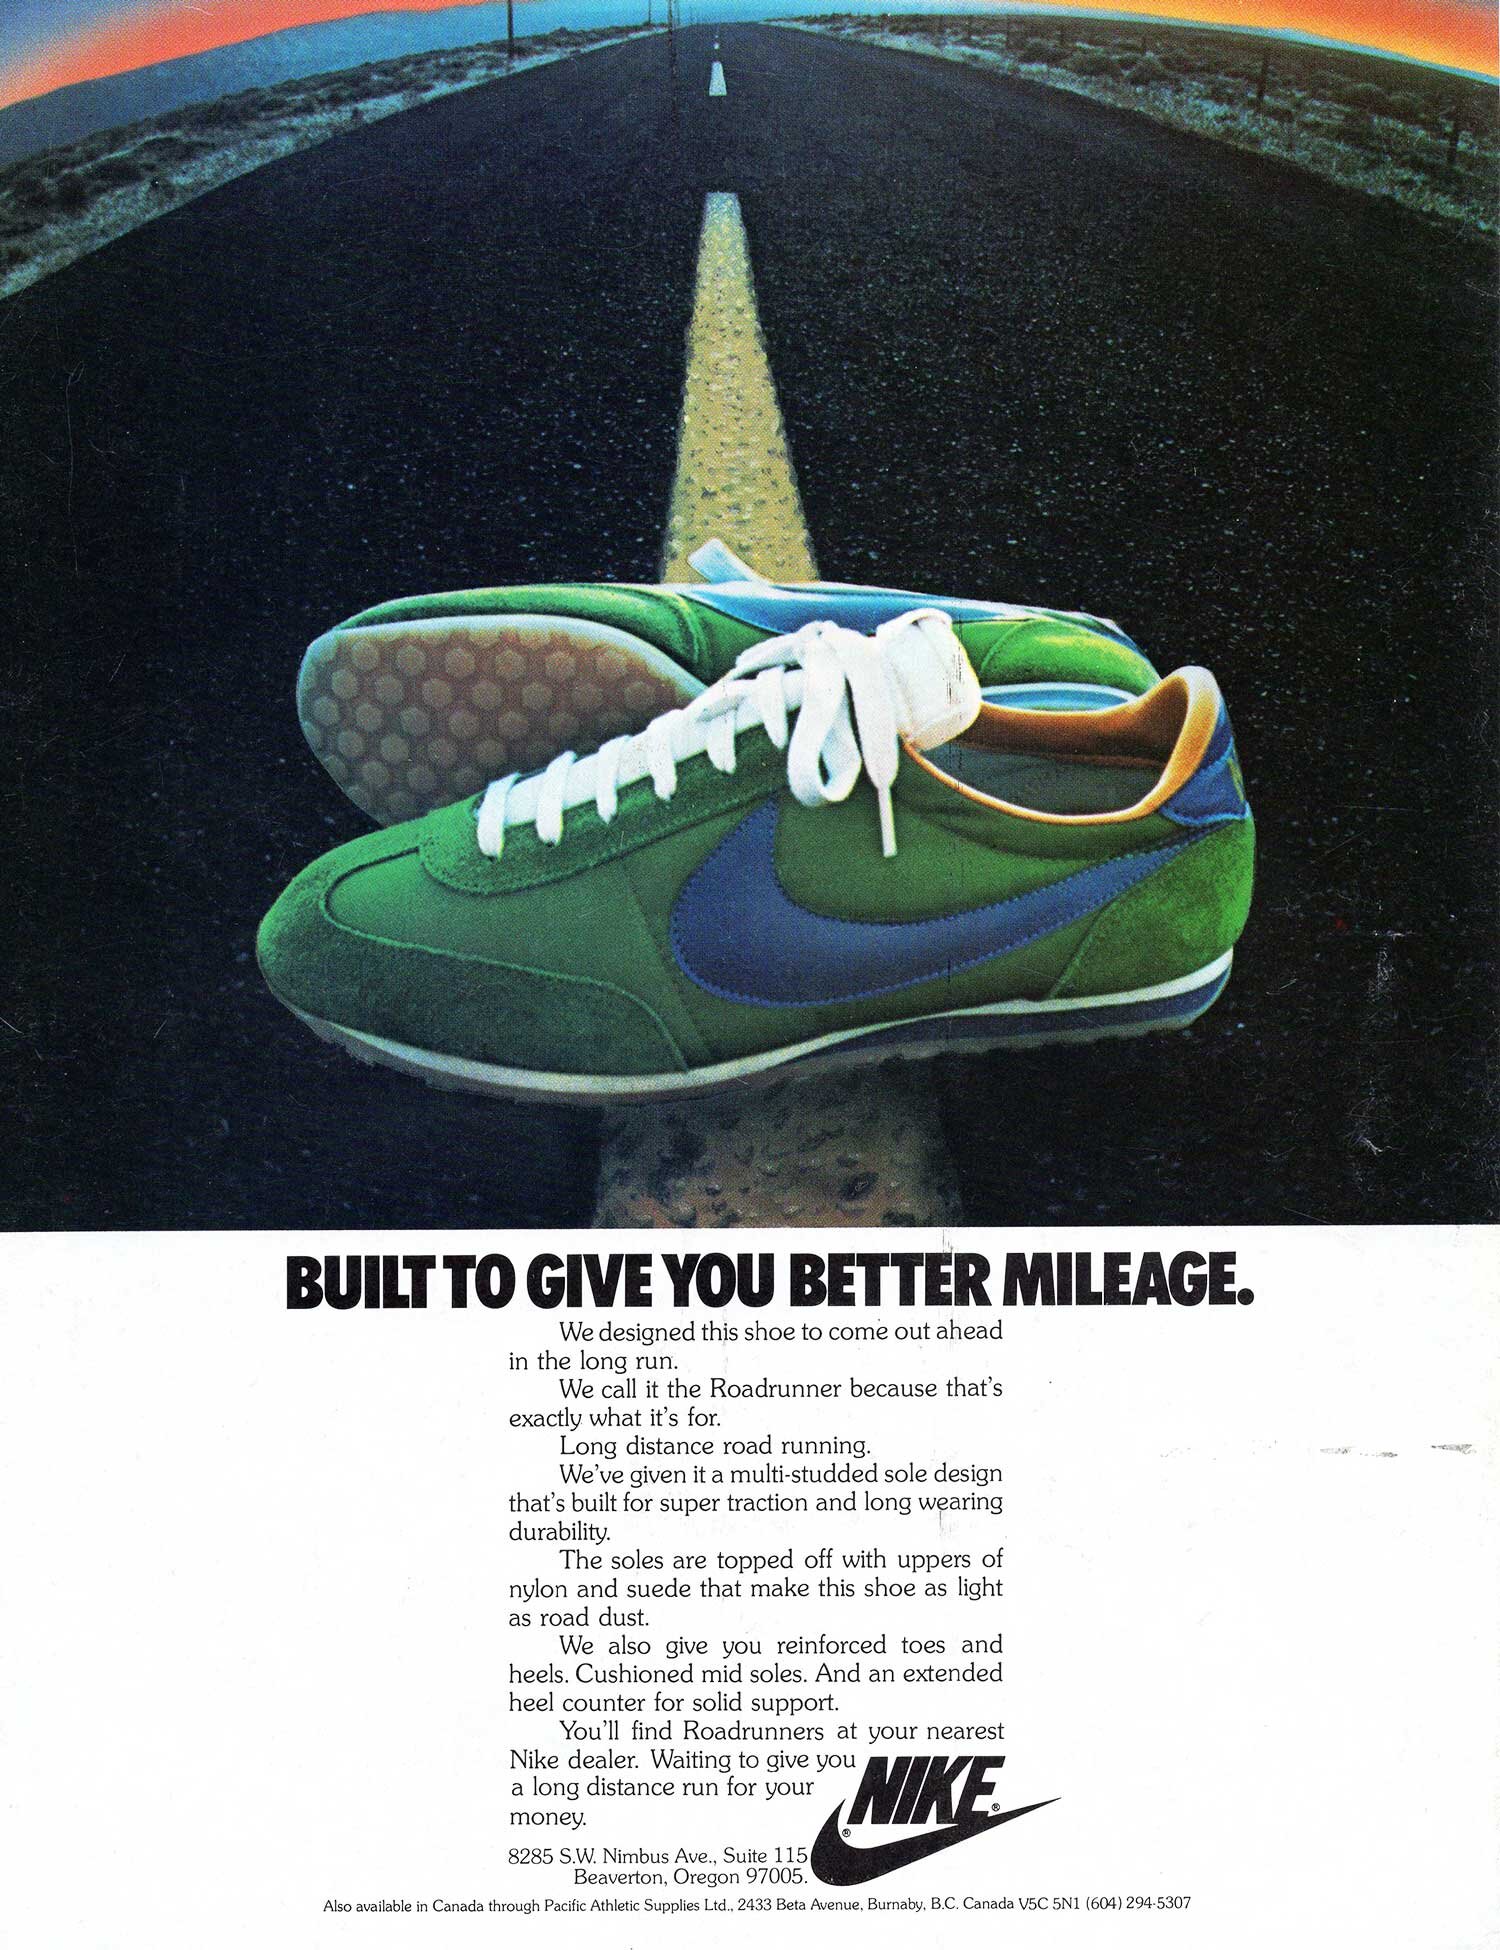 1970s Nike sneakers The A vintage and retro sneaker Vintage Ads